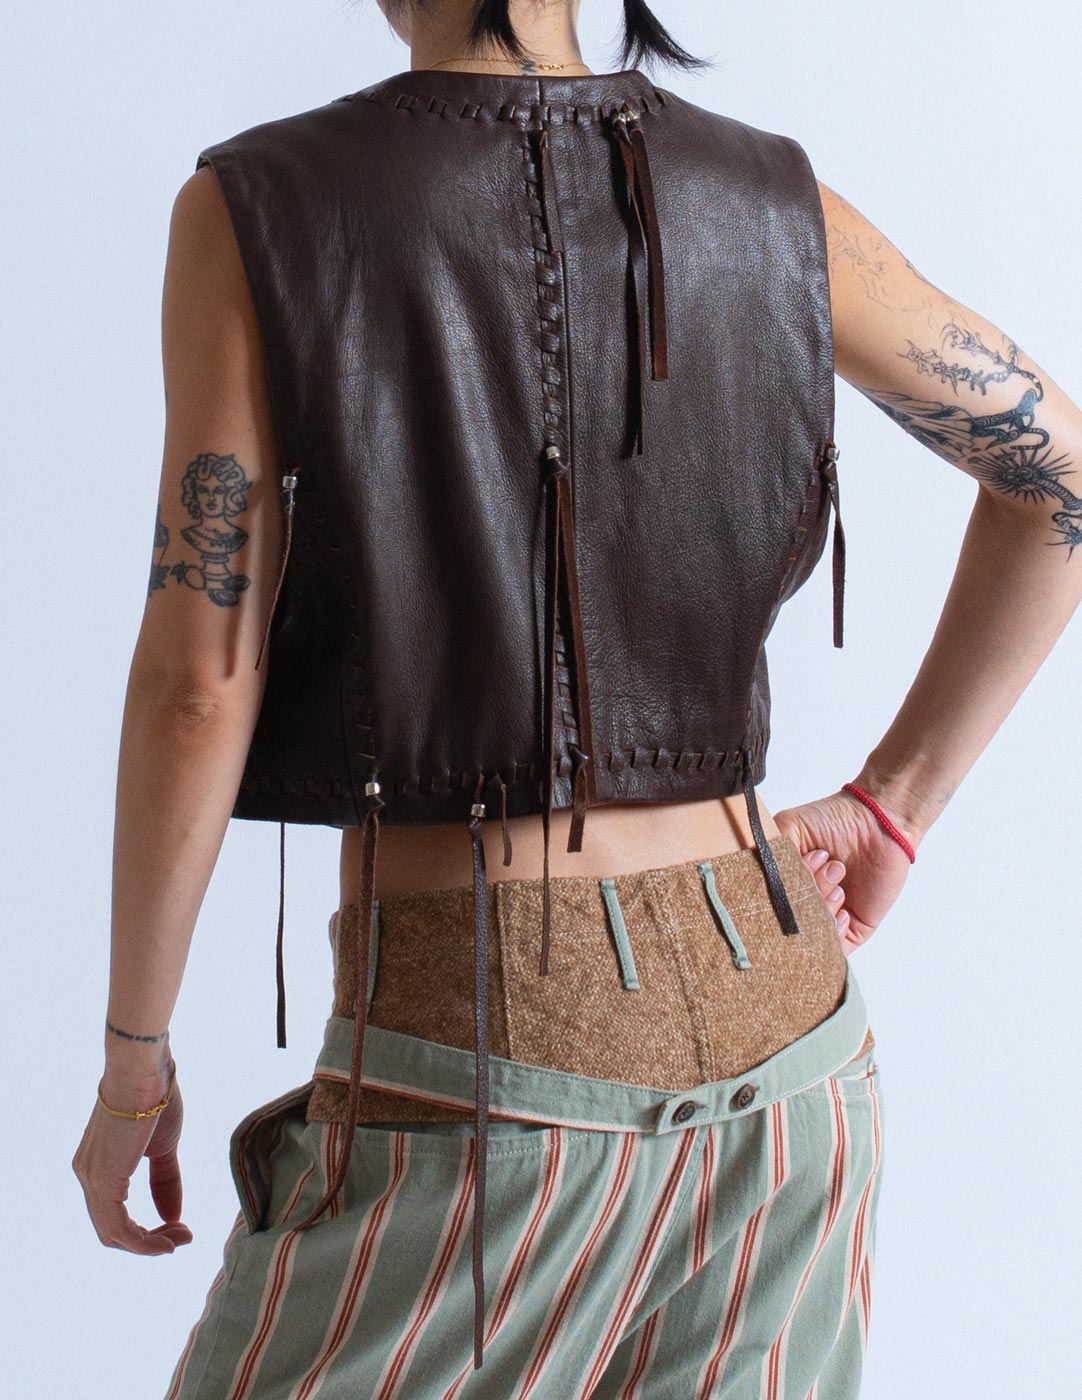 Issey Miyake vintage chocolate leather vest with tassels back detail